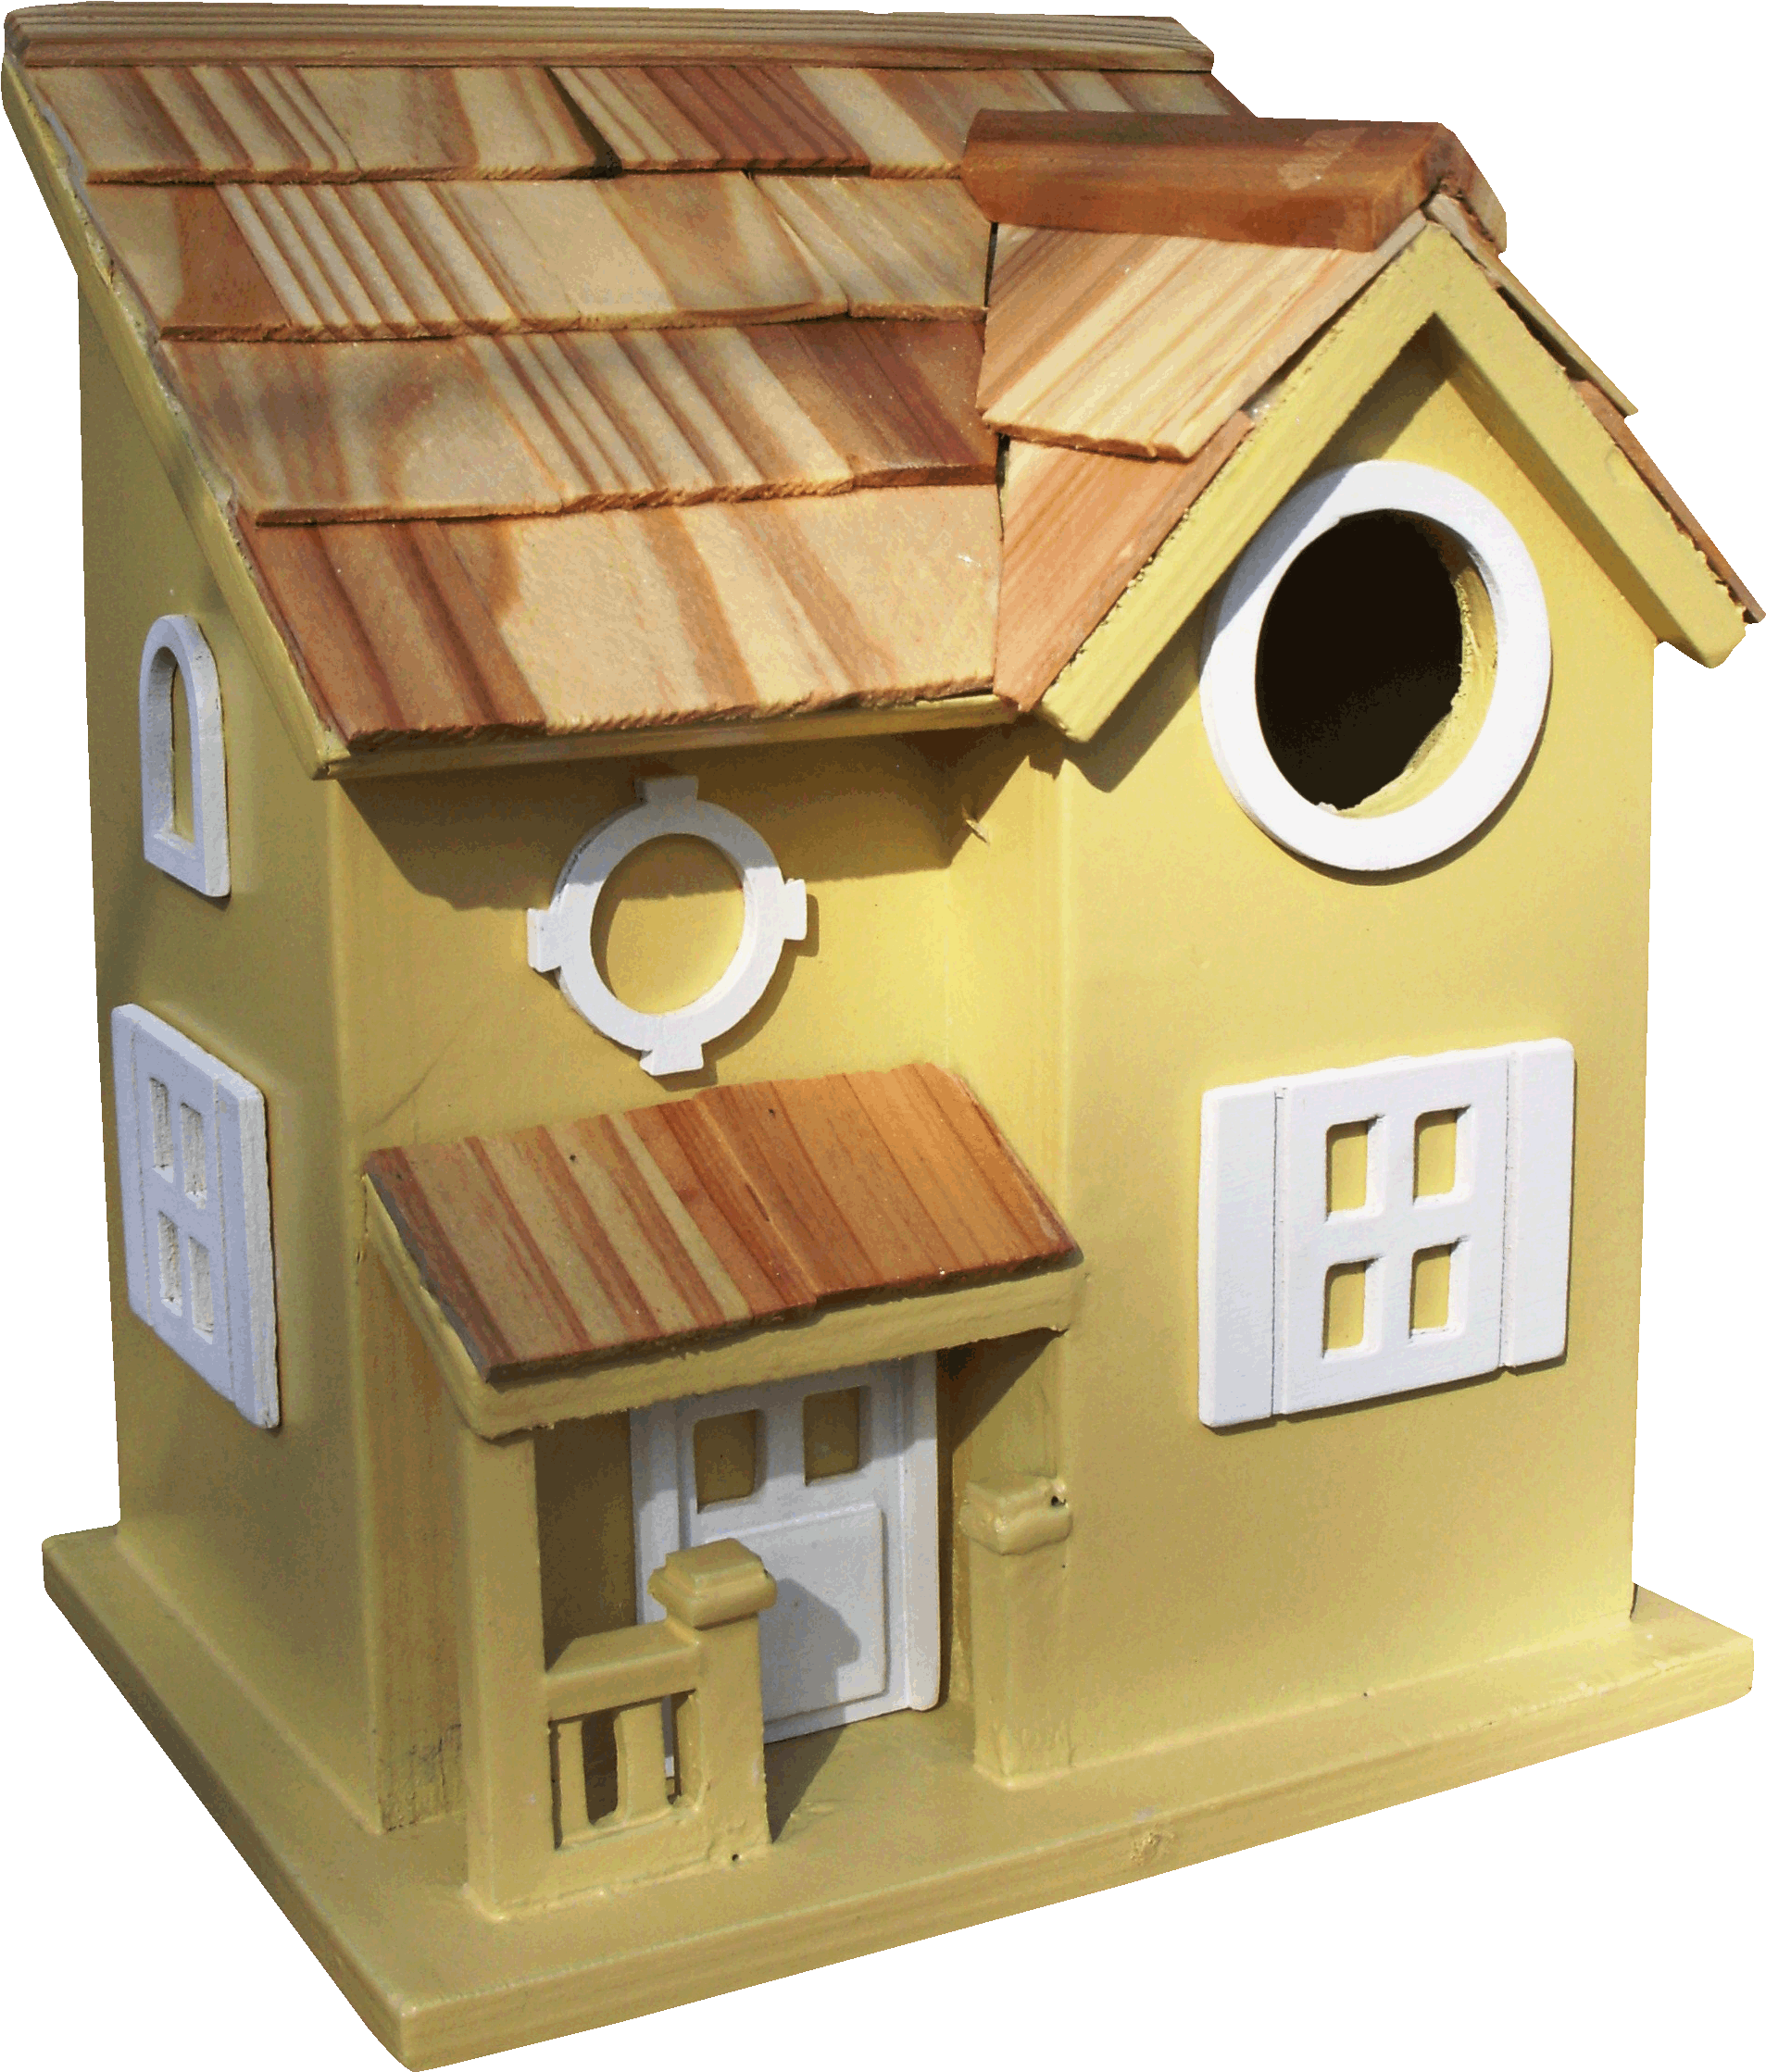 Nestling Cottage Birdhouse - Outdoor Accents Birdcare Yellow Nestling Cottage Birdhouse (1995x2879)